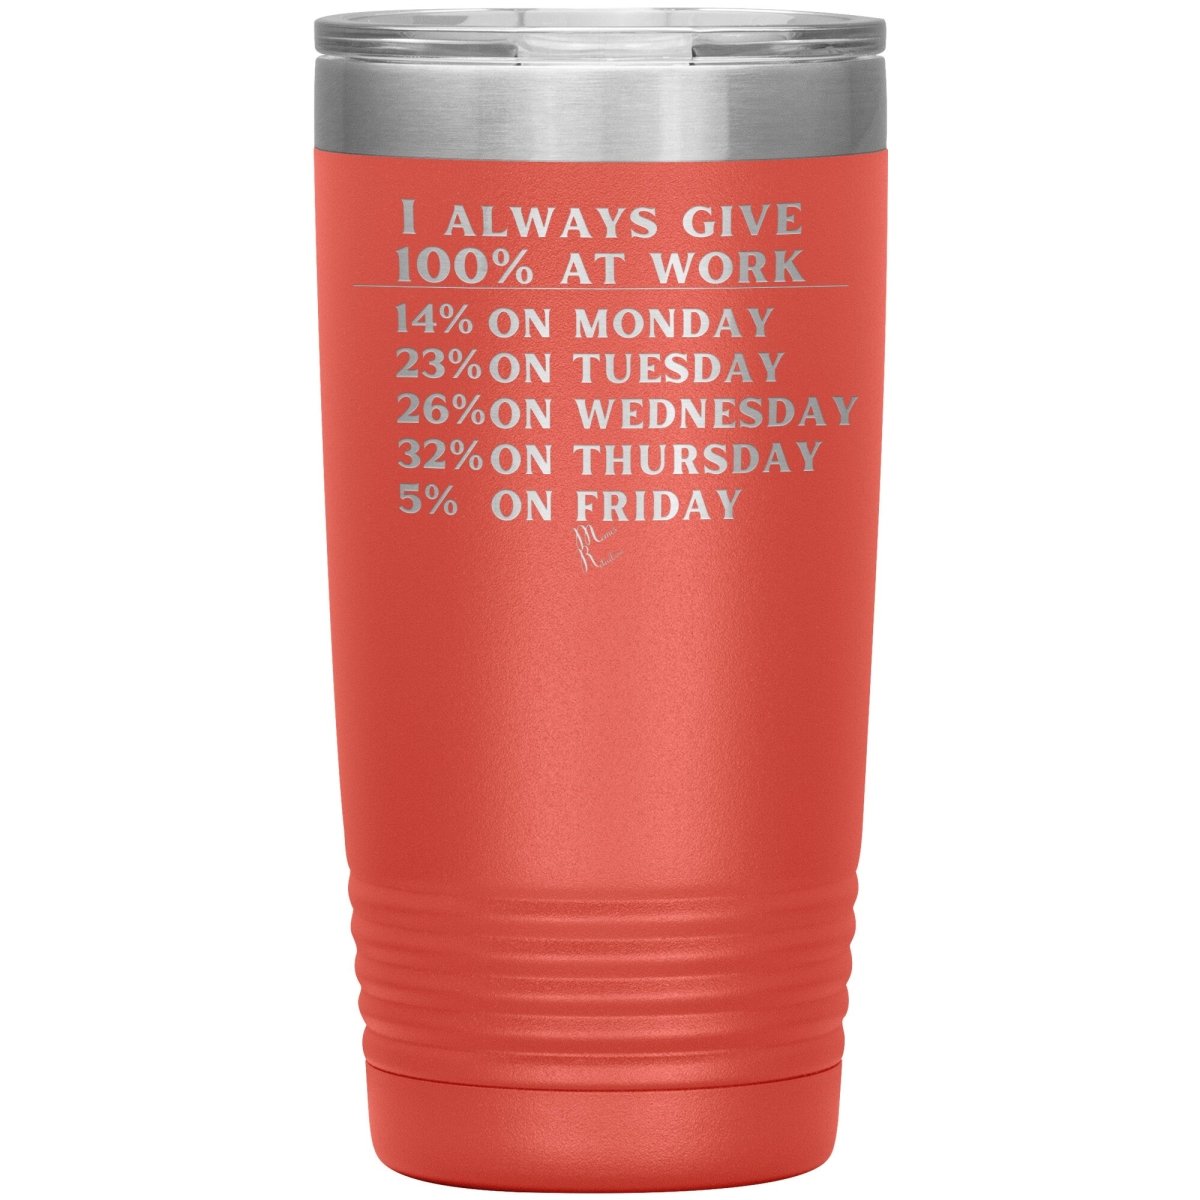 I Always Give 100% At Work Tumblers, 20oz Insulated Tumbler / Coral - MemesRetail.com